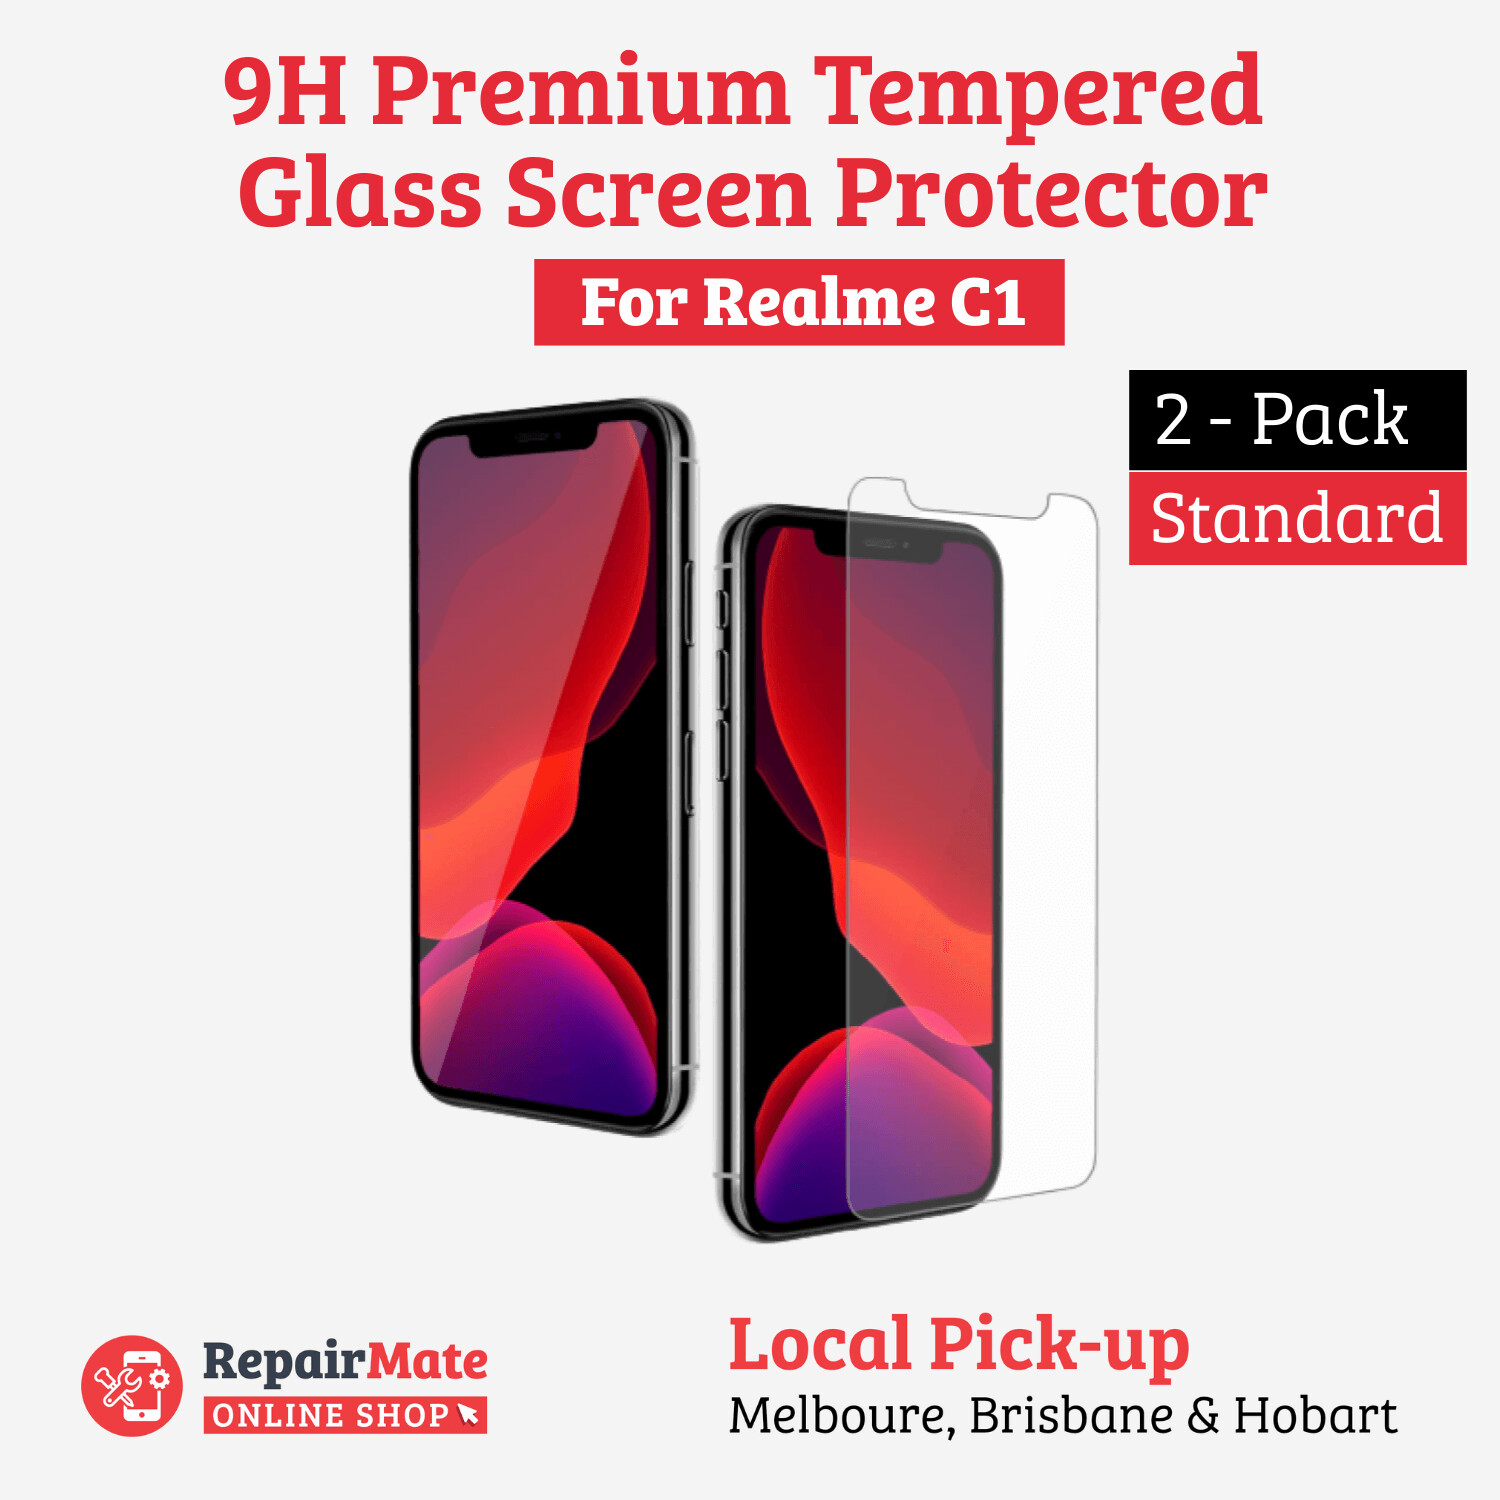 Realme C1 9H Premium Tempered Glass Screen Protector [2 Pack]